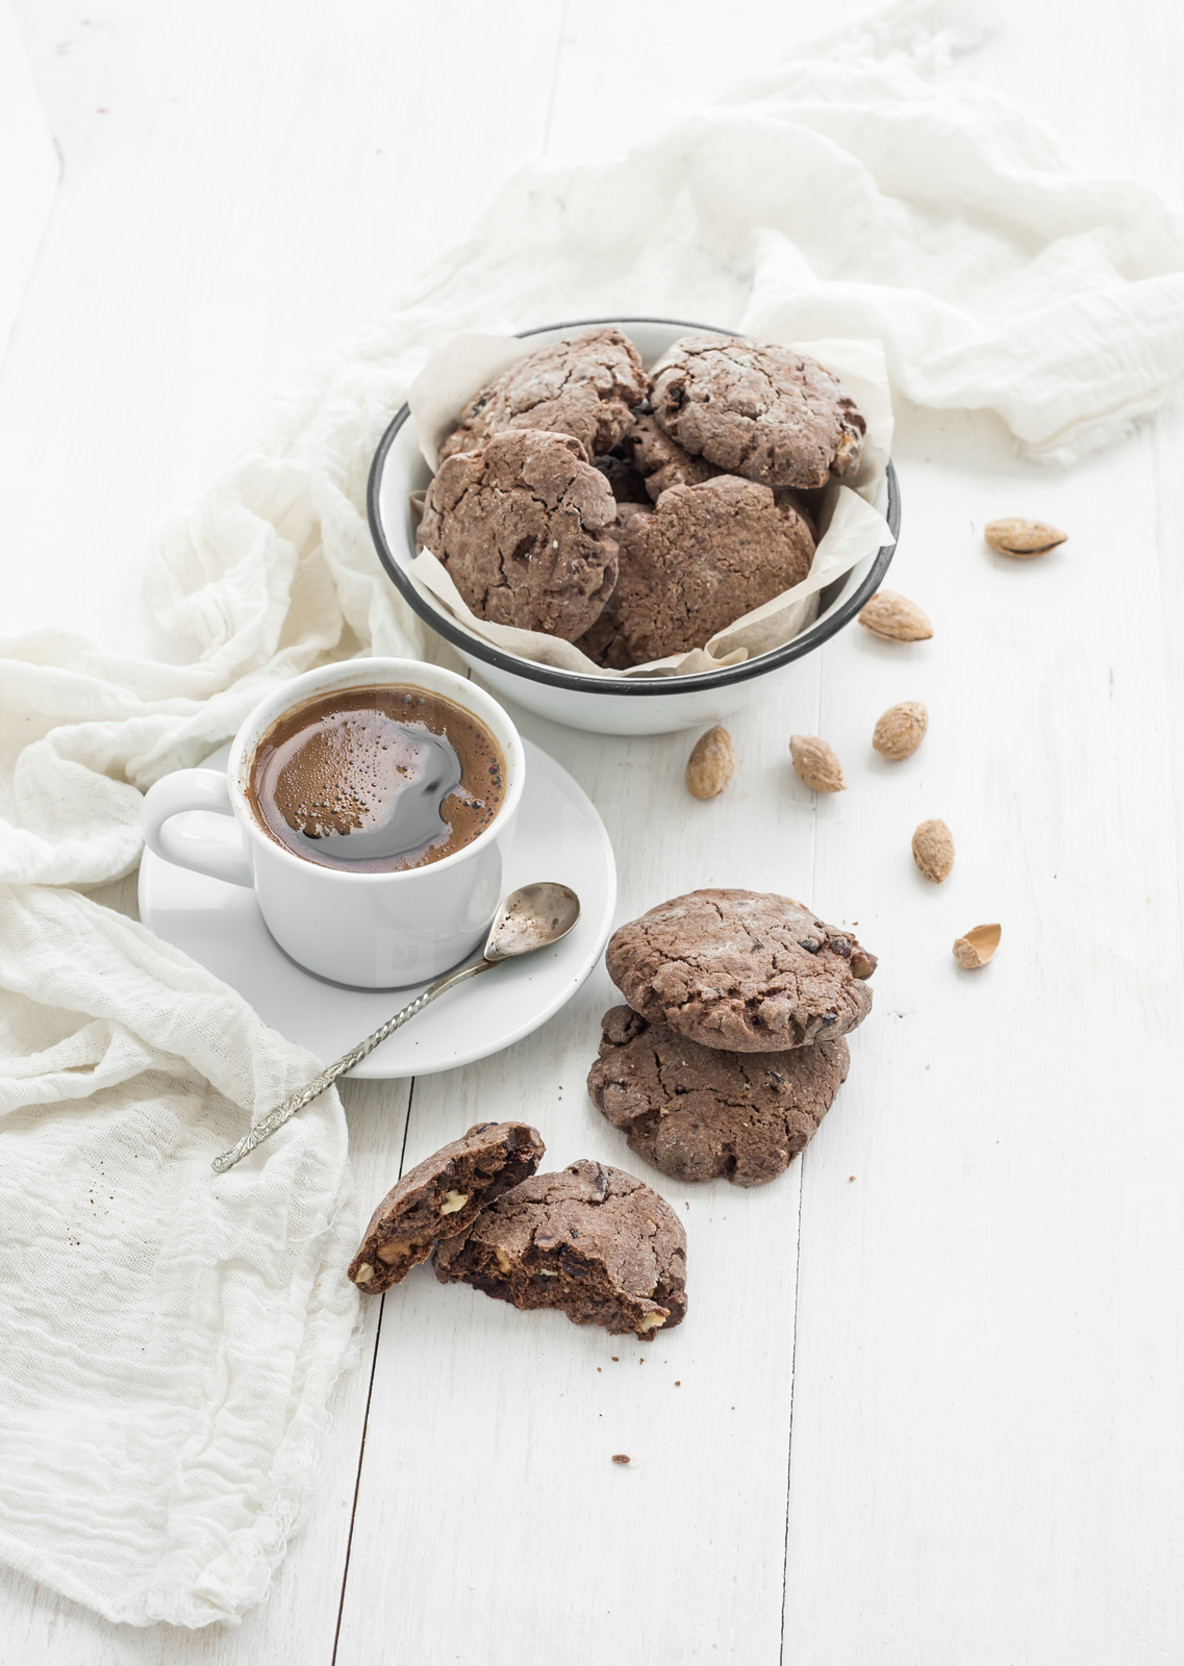 Chocolate cookies with almond and cranberries  cup of coffee  white wooden backdrop